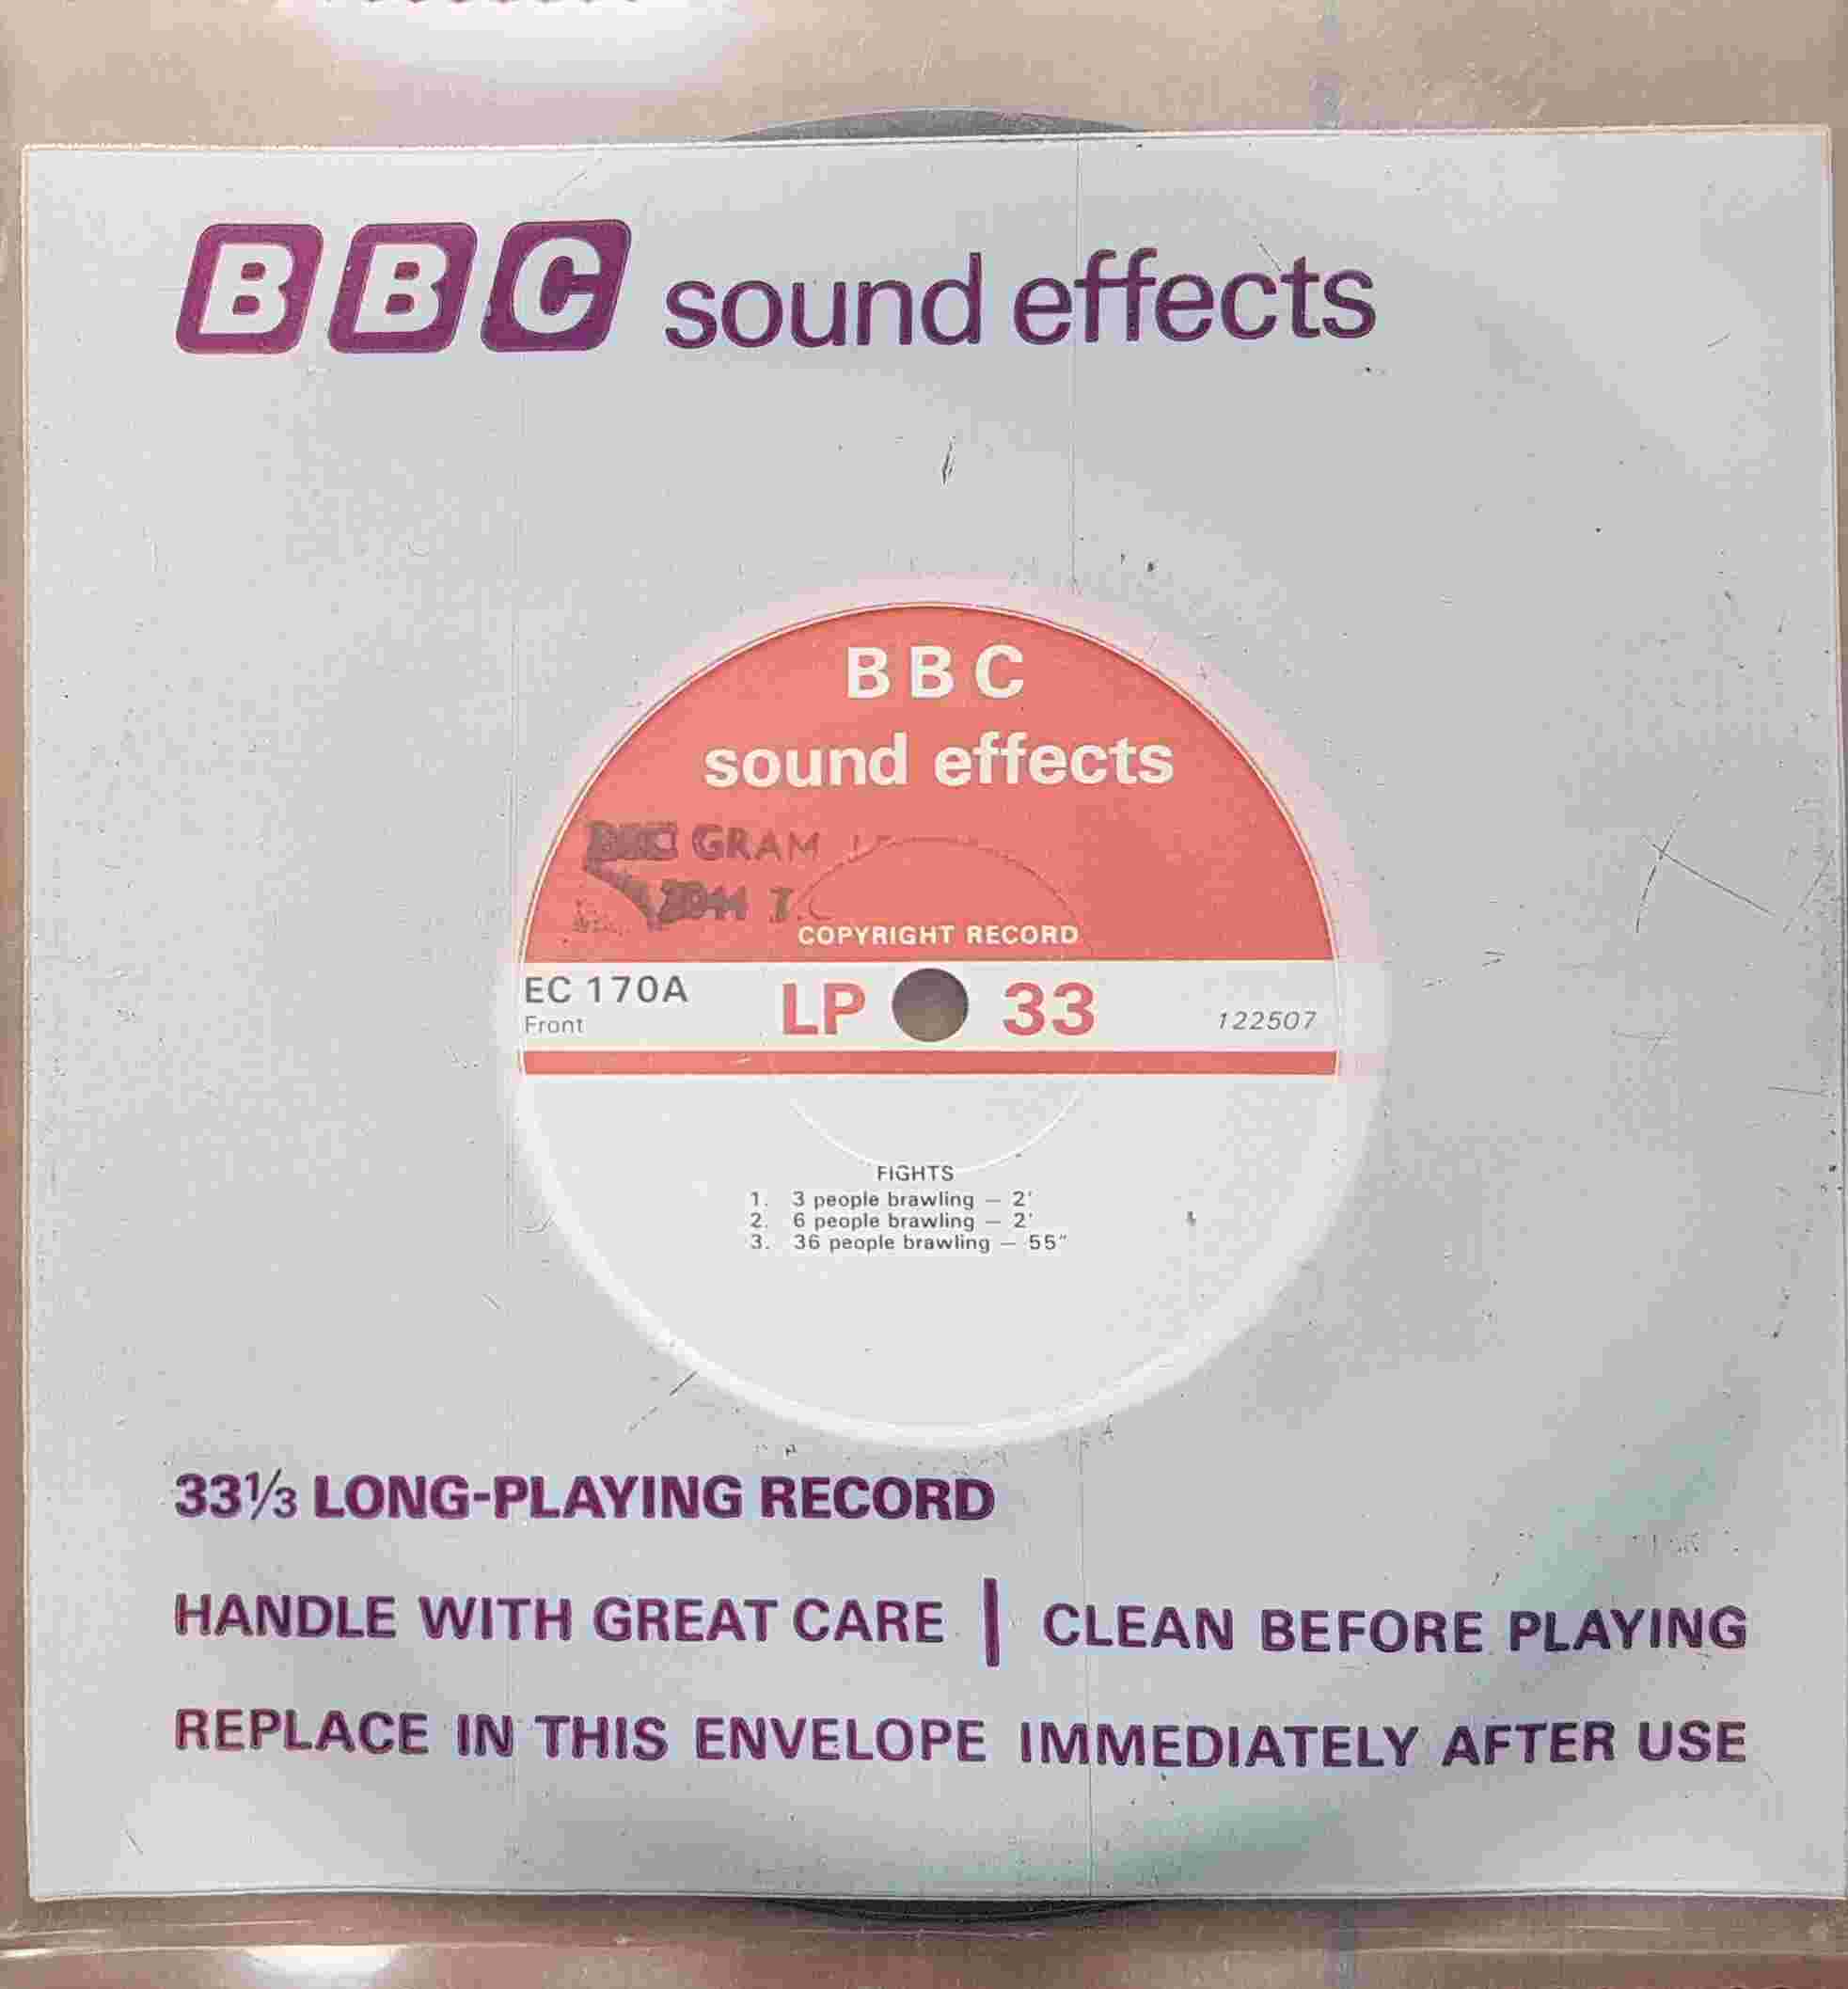 Picture of EC 170A Fights by artist Not registered from the BBC singles - Records and Tapes library